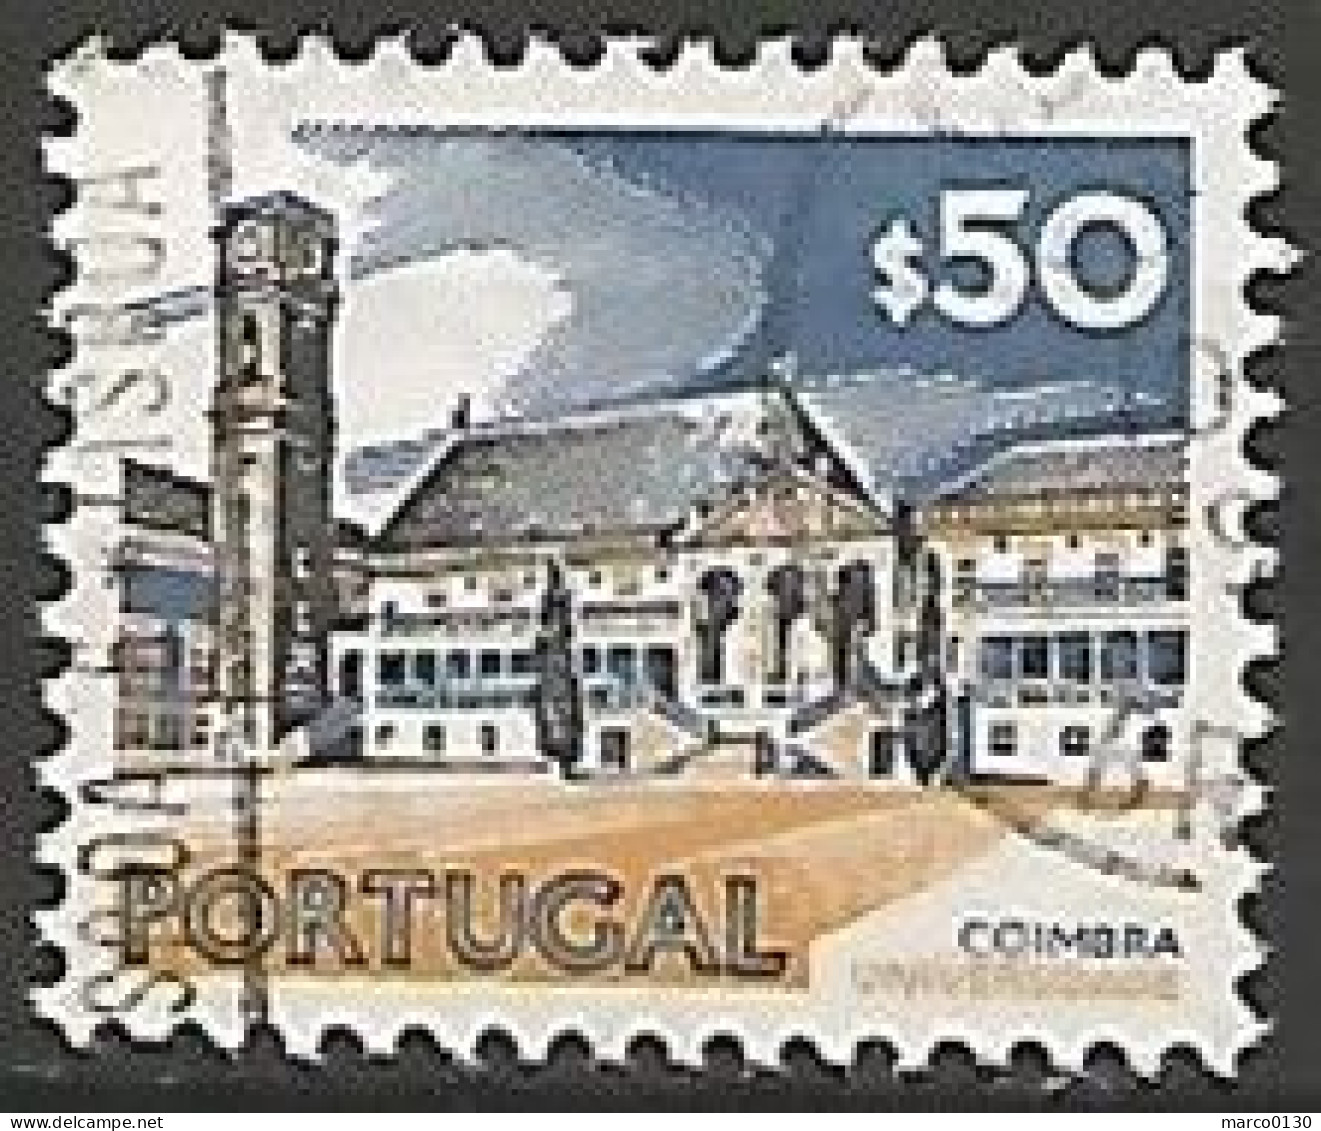 PORTUGAL N° 1136 OBLITERE CTT 1972 - Used Stamps